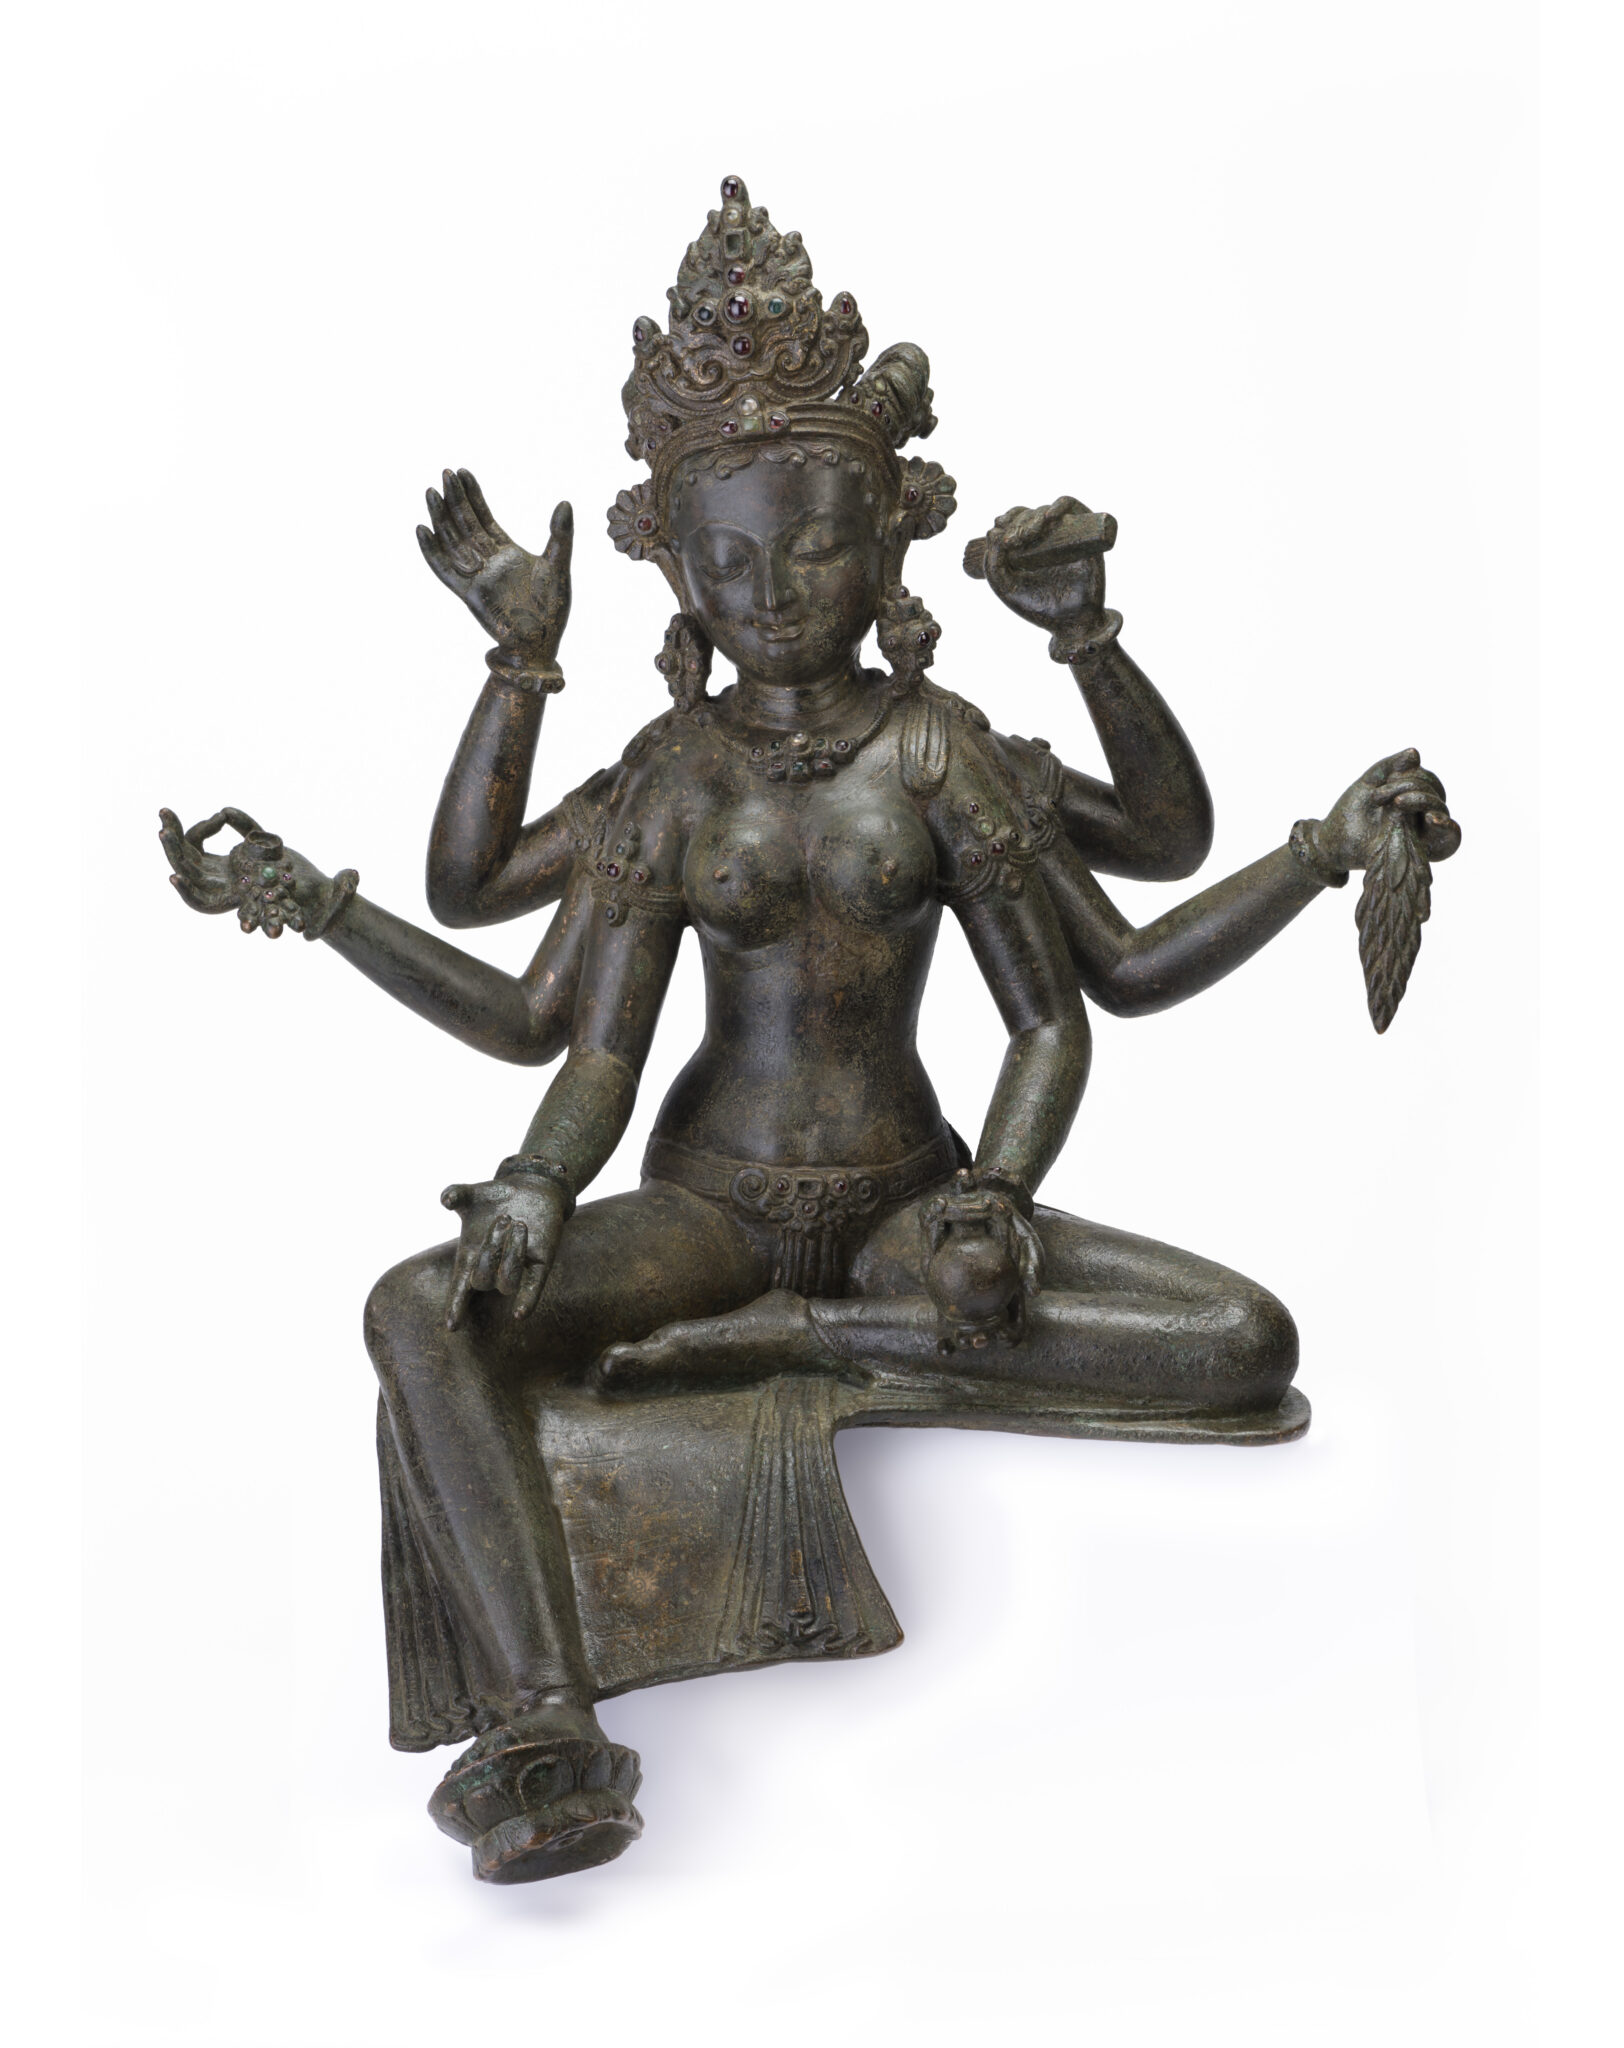 Patinated dark metal statue of six-armed goddess seated with left foot resting on lotus blossom